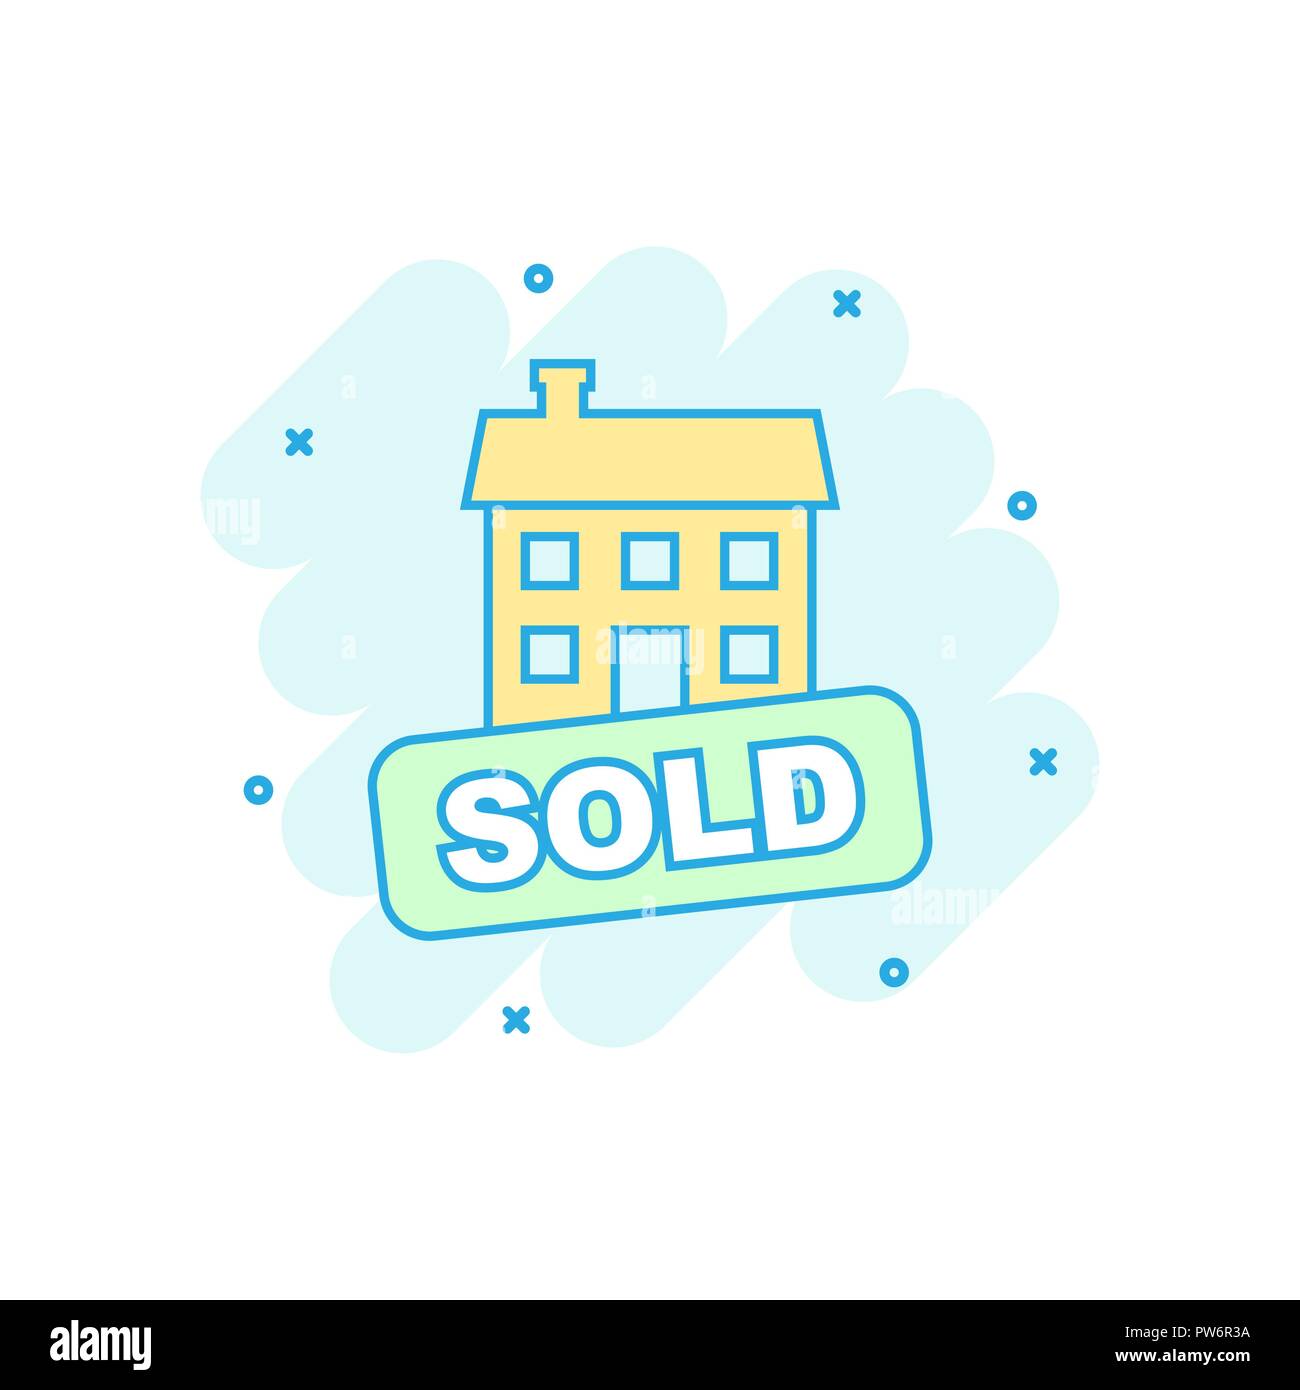 Vector cartoon sold house icon in comic style. Sold sign illustration pictogram. Purchasing business splash effect concept. Stock Vector